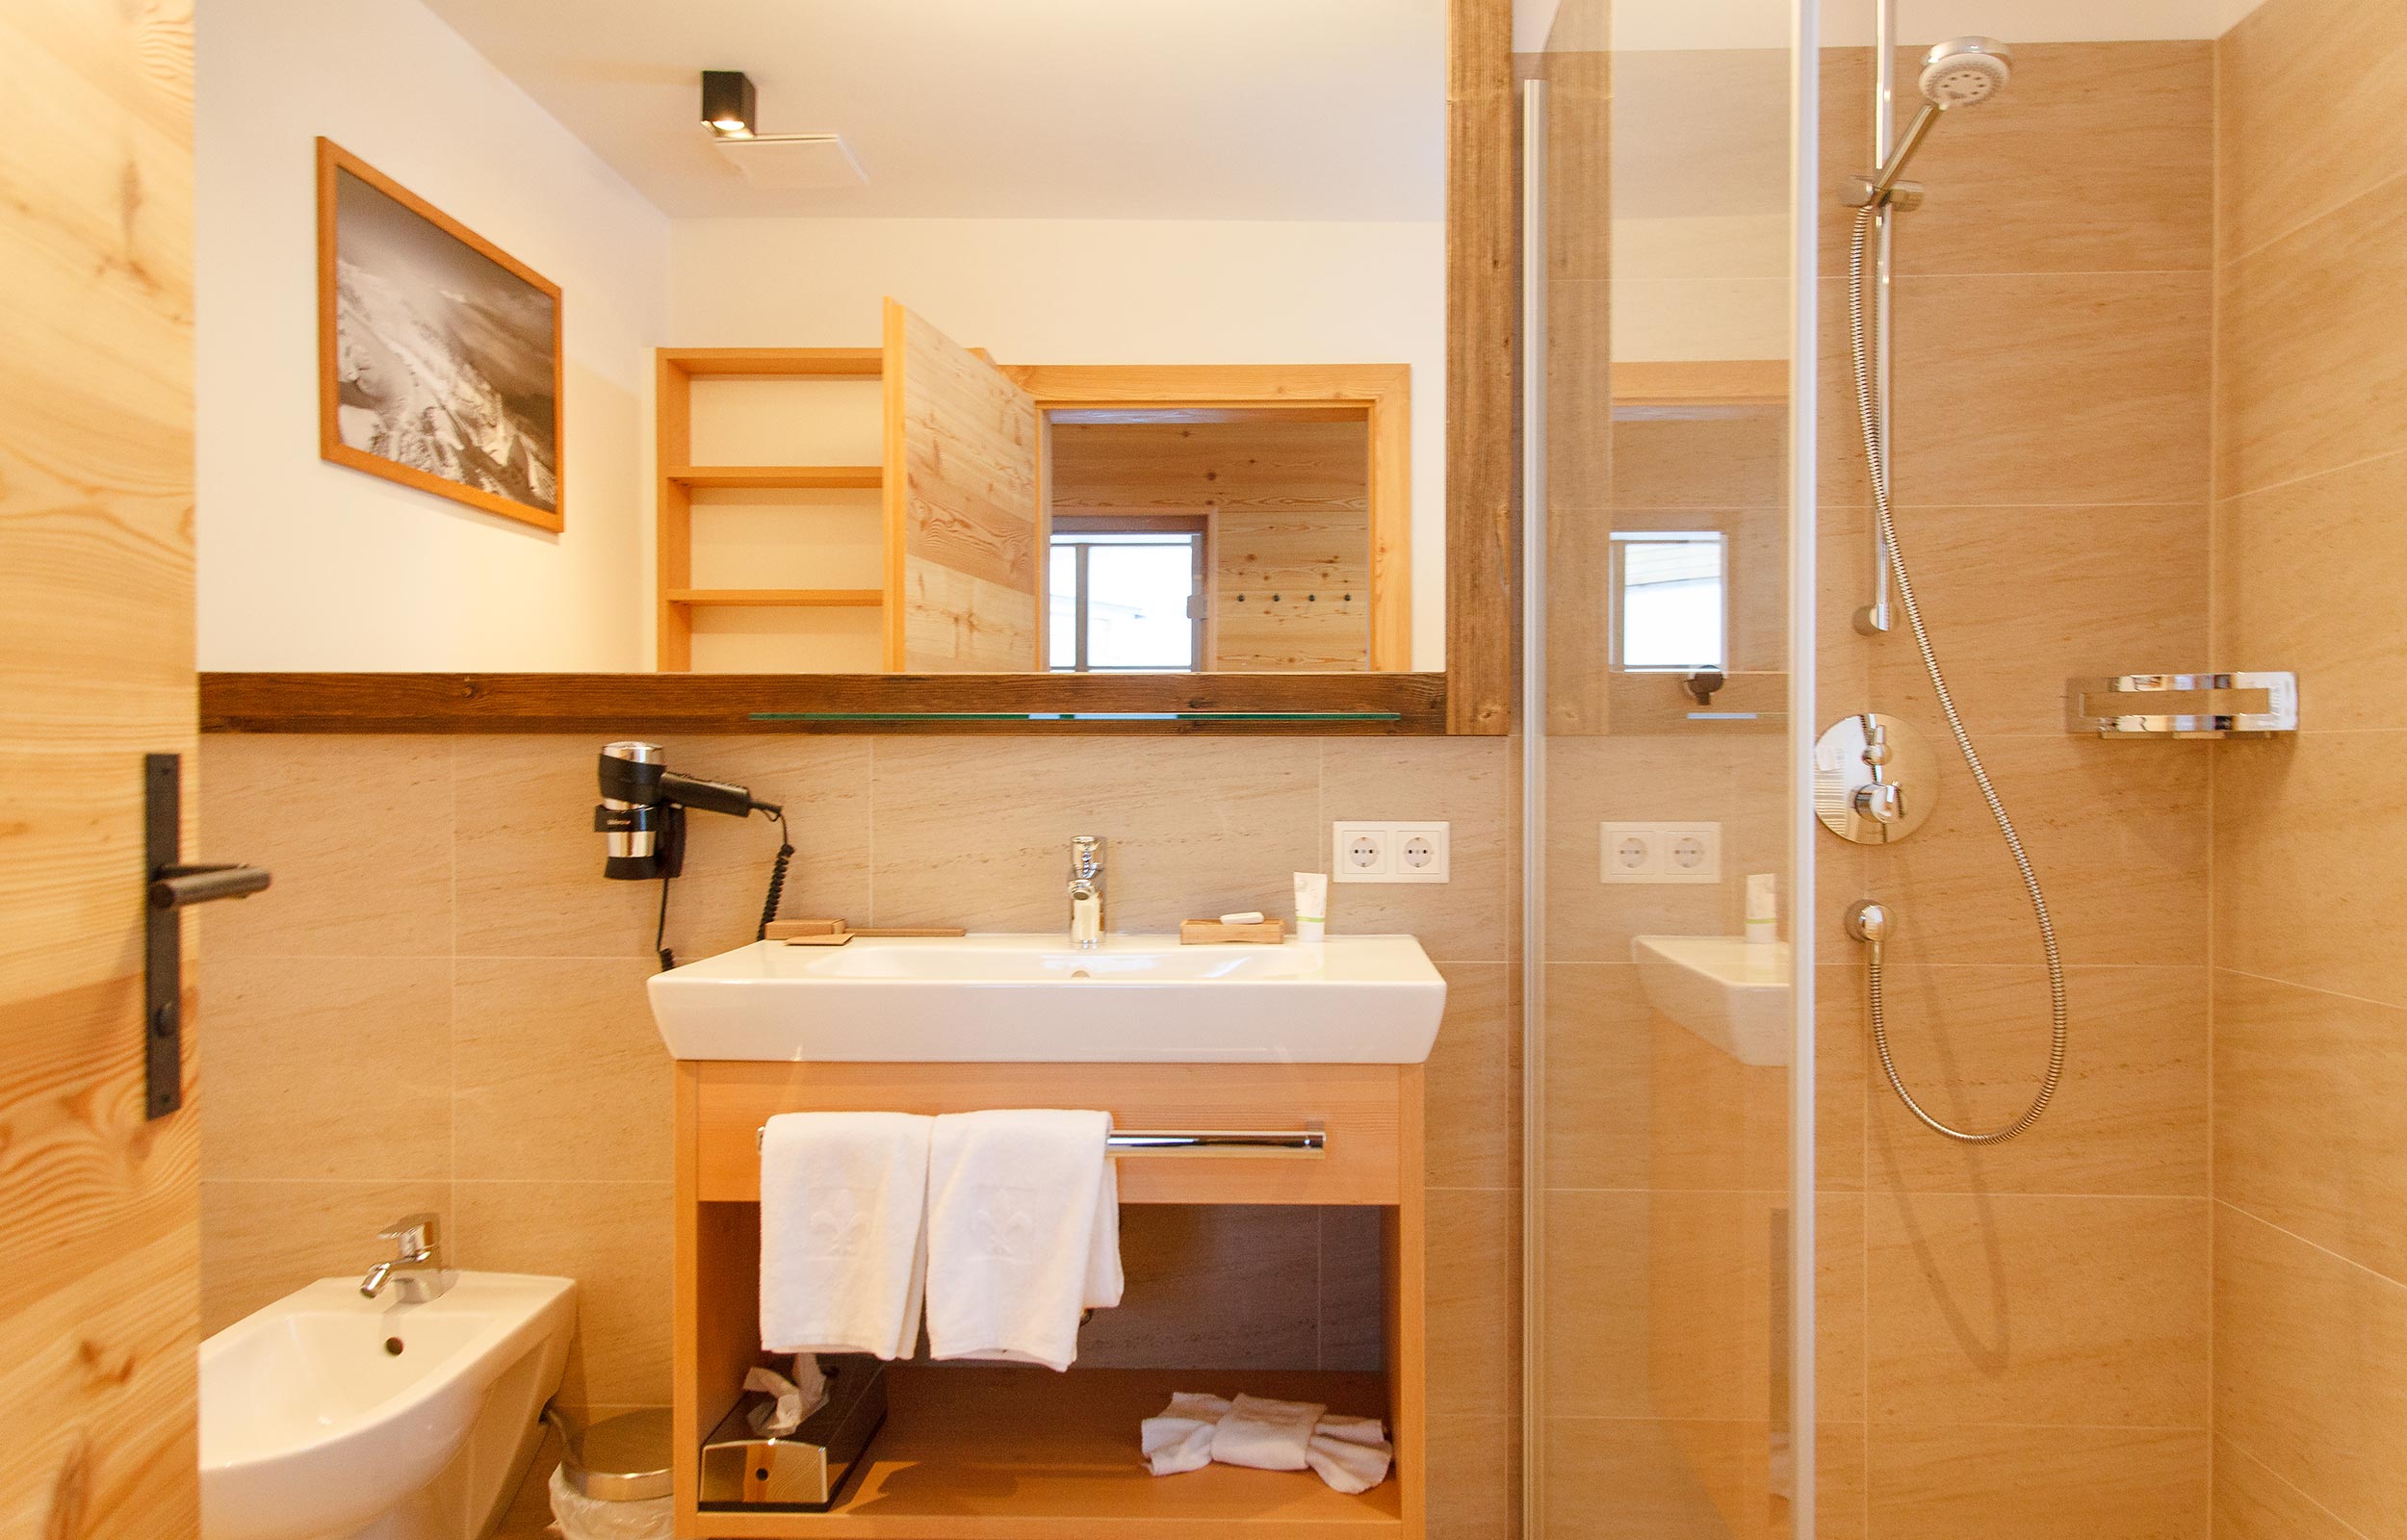 A fully equipped bathroom in the chalet with shower, bidet and a sink